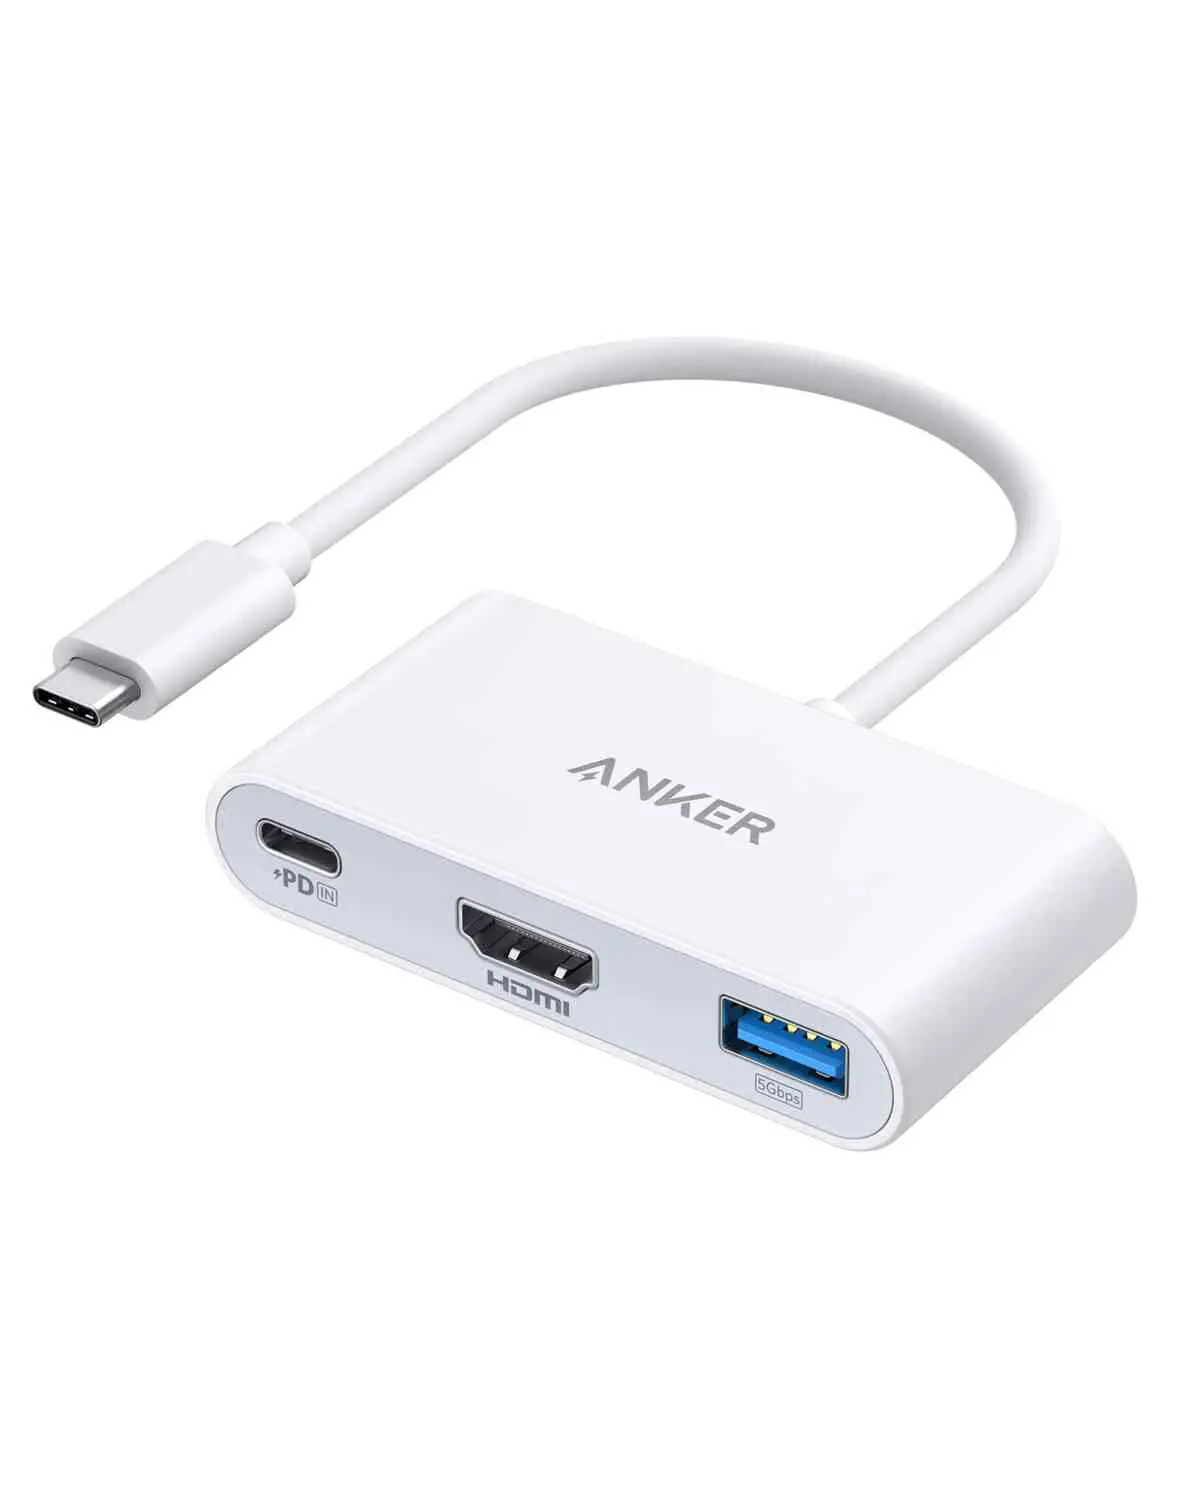 Anker PowerExpand 3 in 1 USB C PD Hub 3 _ Deximpo International Limited